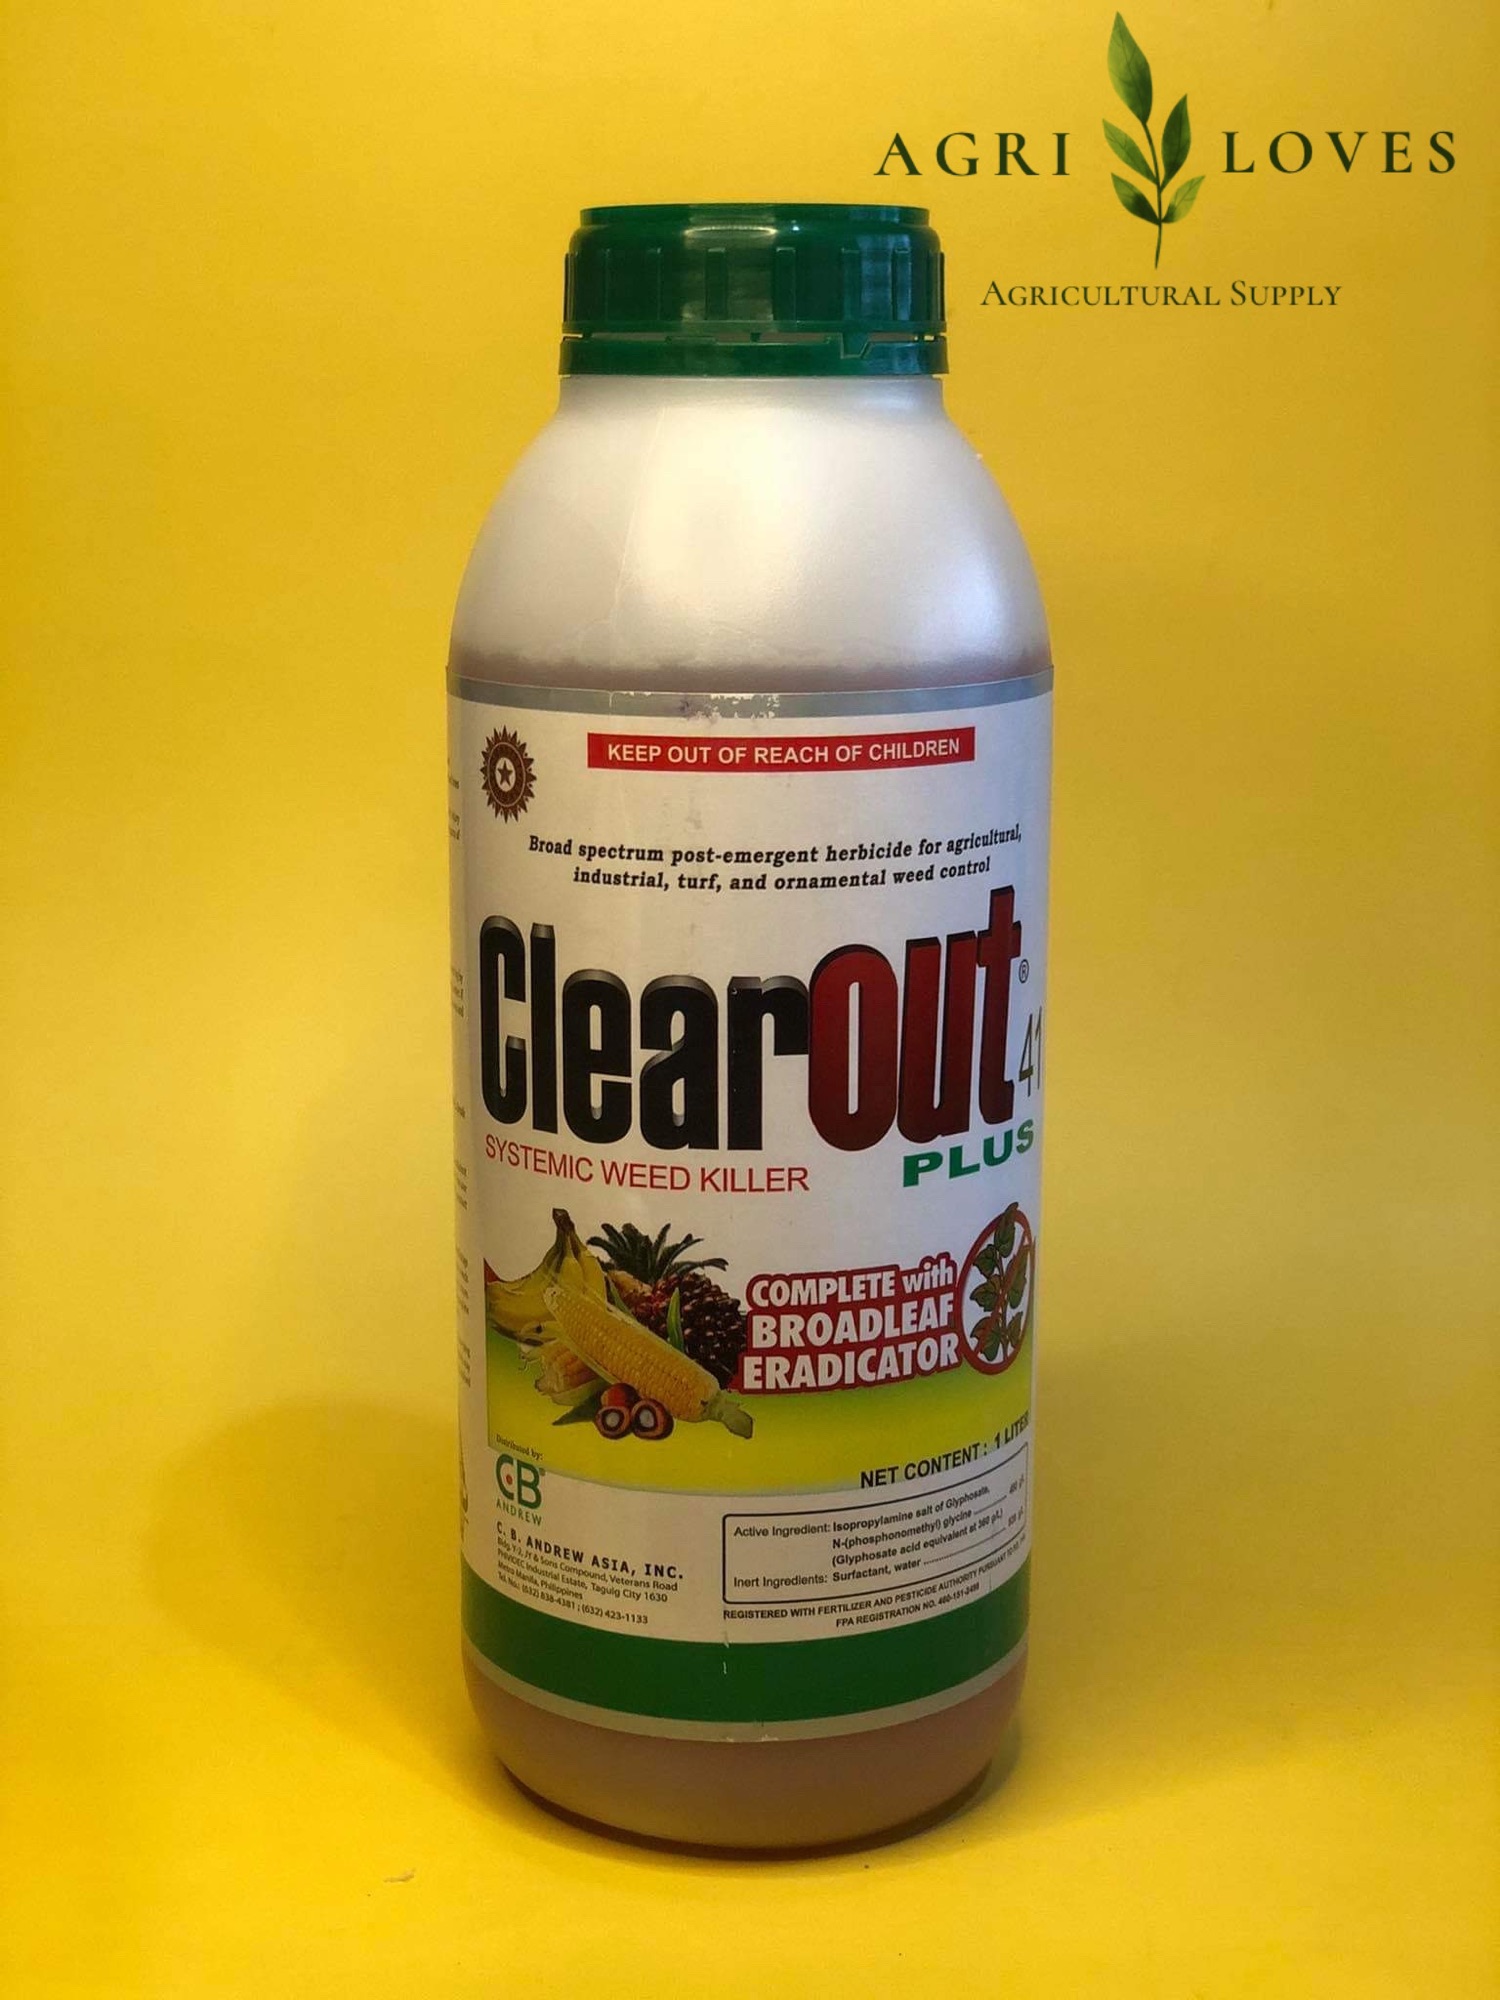 clear-out-41-plus-herbicide-500ml-1-liter-lazada-ph